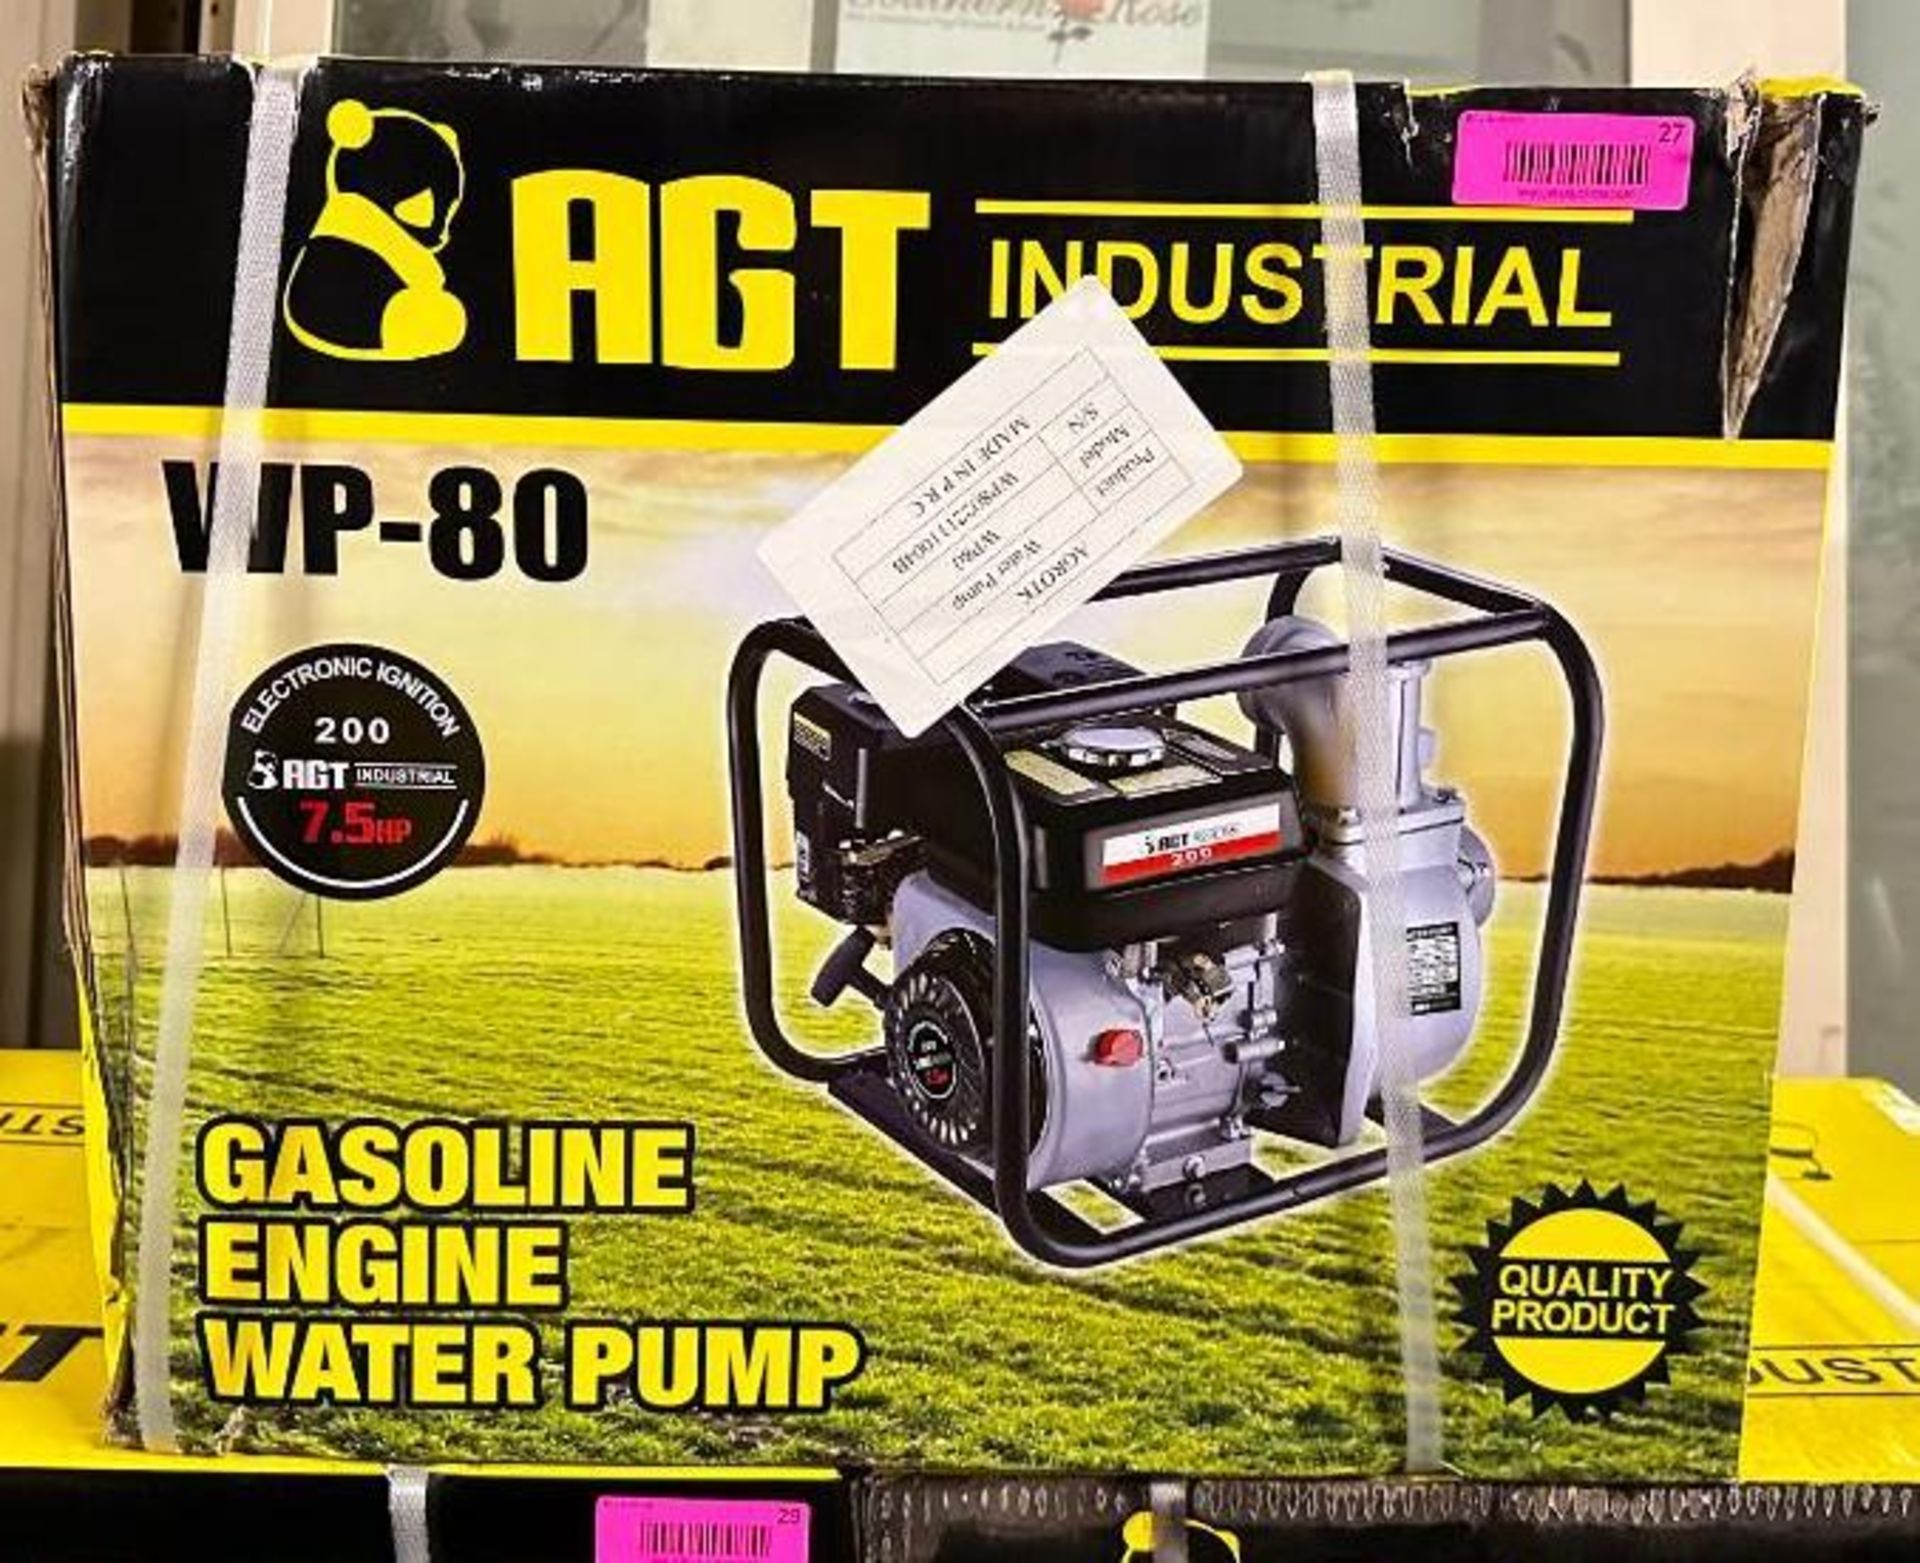 AGT WP-80 PORTABLE 3" WATER PUMP BRAND/MODEL: AGT WP-80 INFORMATION: NEW, 7.5 HP GAS ENGINE RECOIL - Image 3 of 5